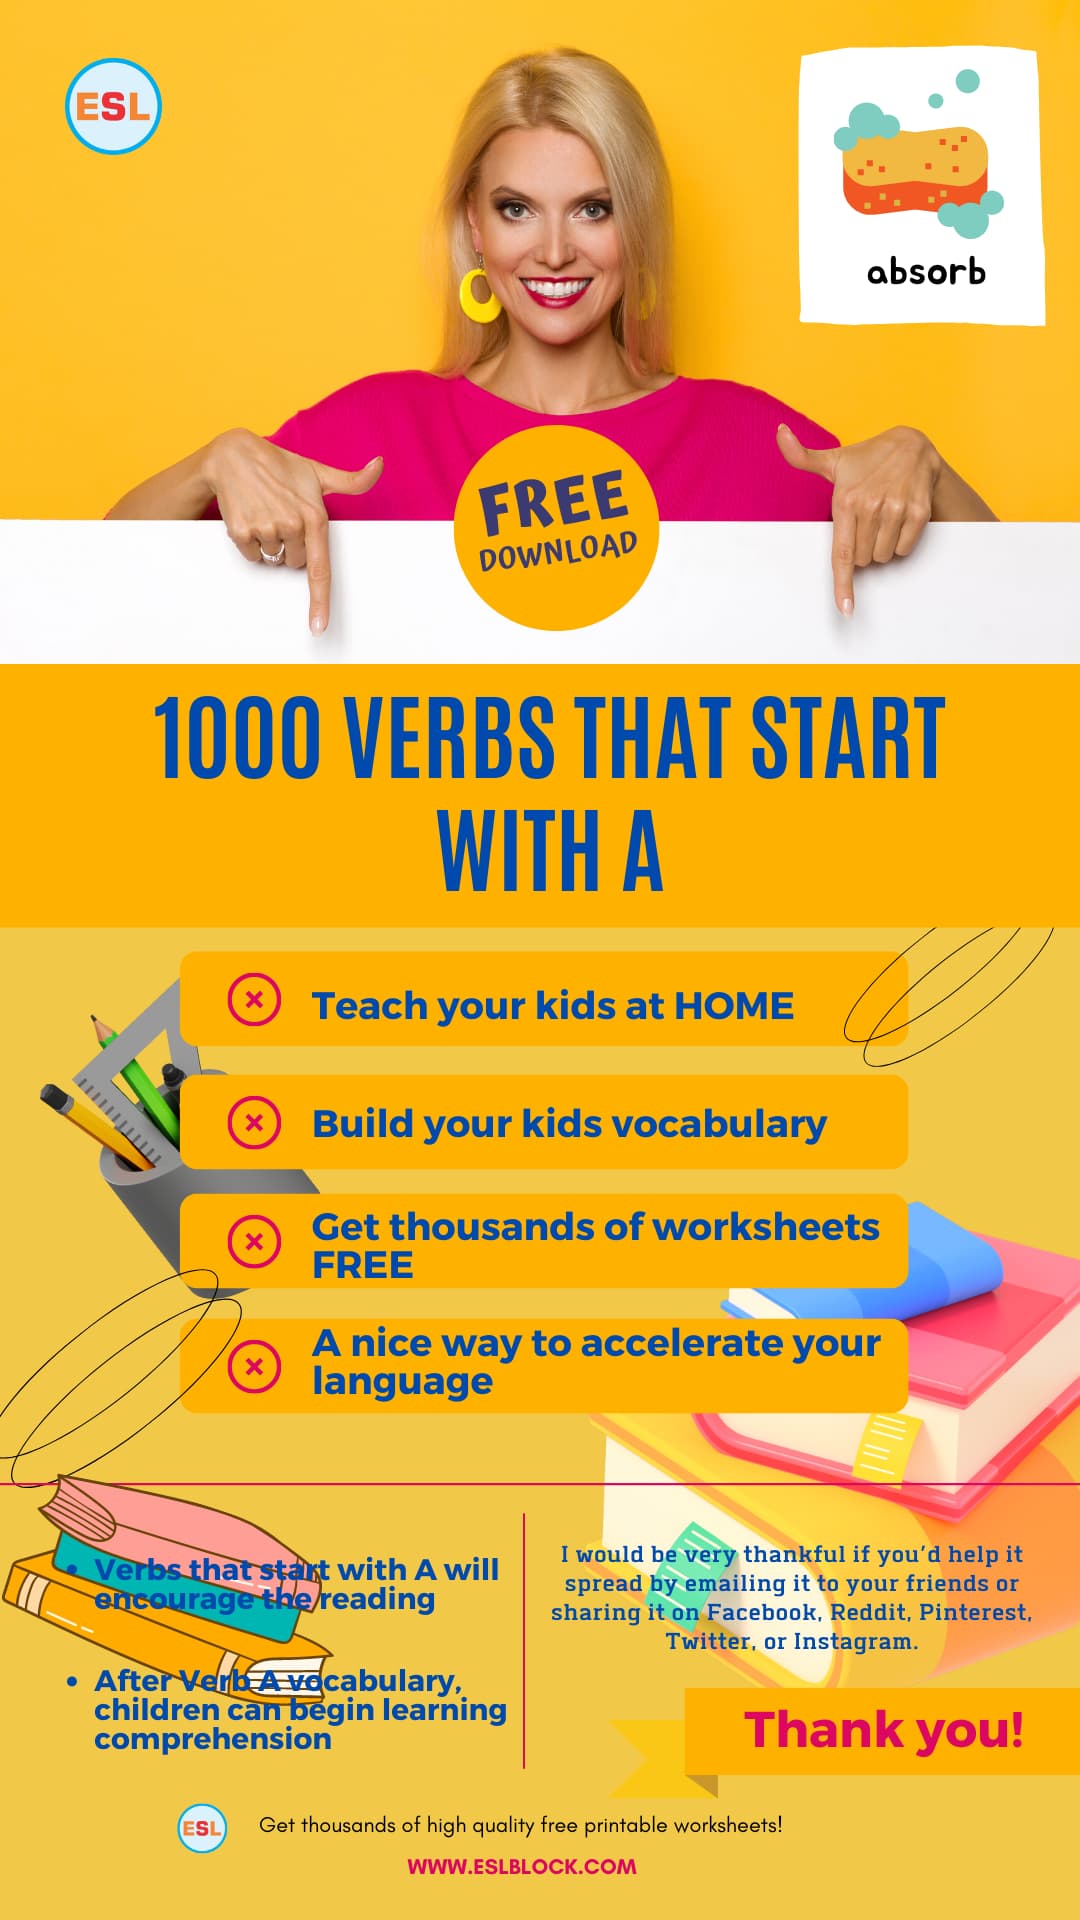 4 Letter Verbs, 5 Letter Verbs Starting With A, A Action Words, A Verbs, A Verbs in English, Action Words, Action Words That Start With A, English, English Grammar, English Vocabulary, English Words, List of Verbs That Start With A, Verbs List, Verbs That Start With A, Vocabulary, Words That Start With a